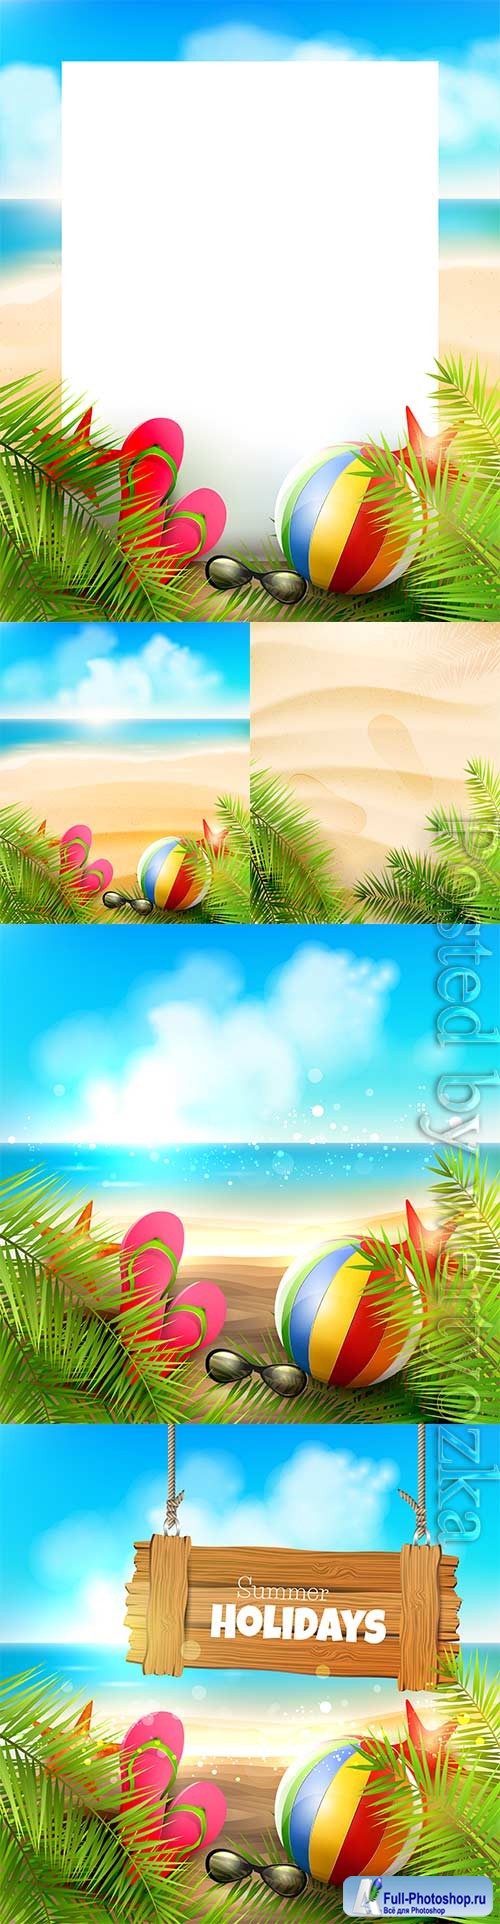 Summer vacation, sea, palm trees, cocktails in vector vol 8